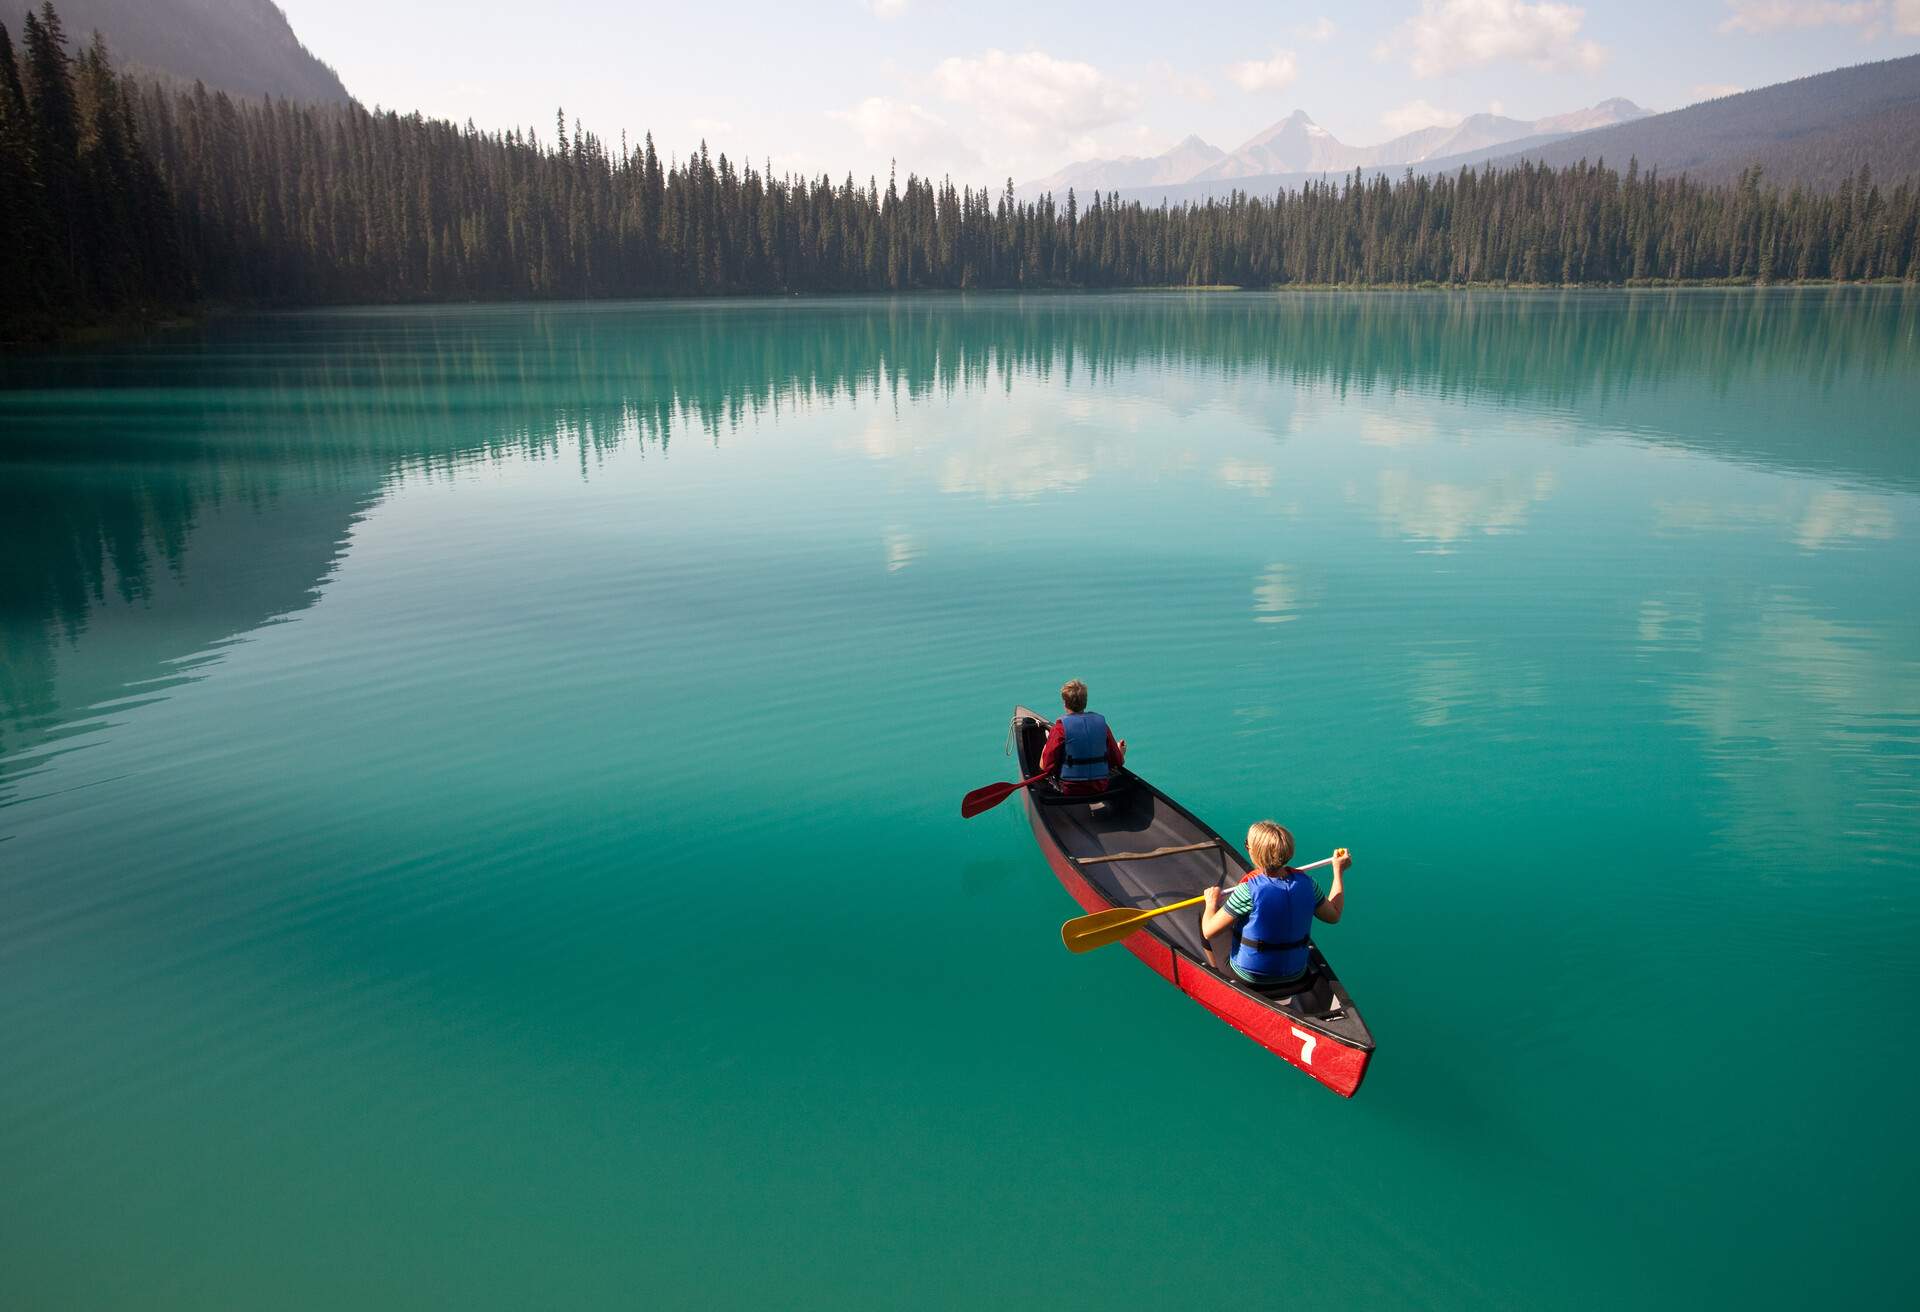 DEST_CANADA_LAKE_EMERALD_CANOEING_PEOPLE_WOMAN_BOY_GettyImages-523198025